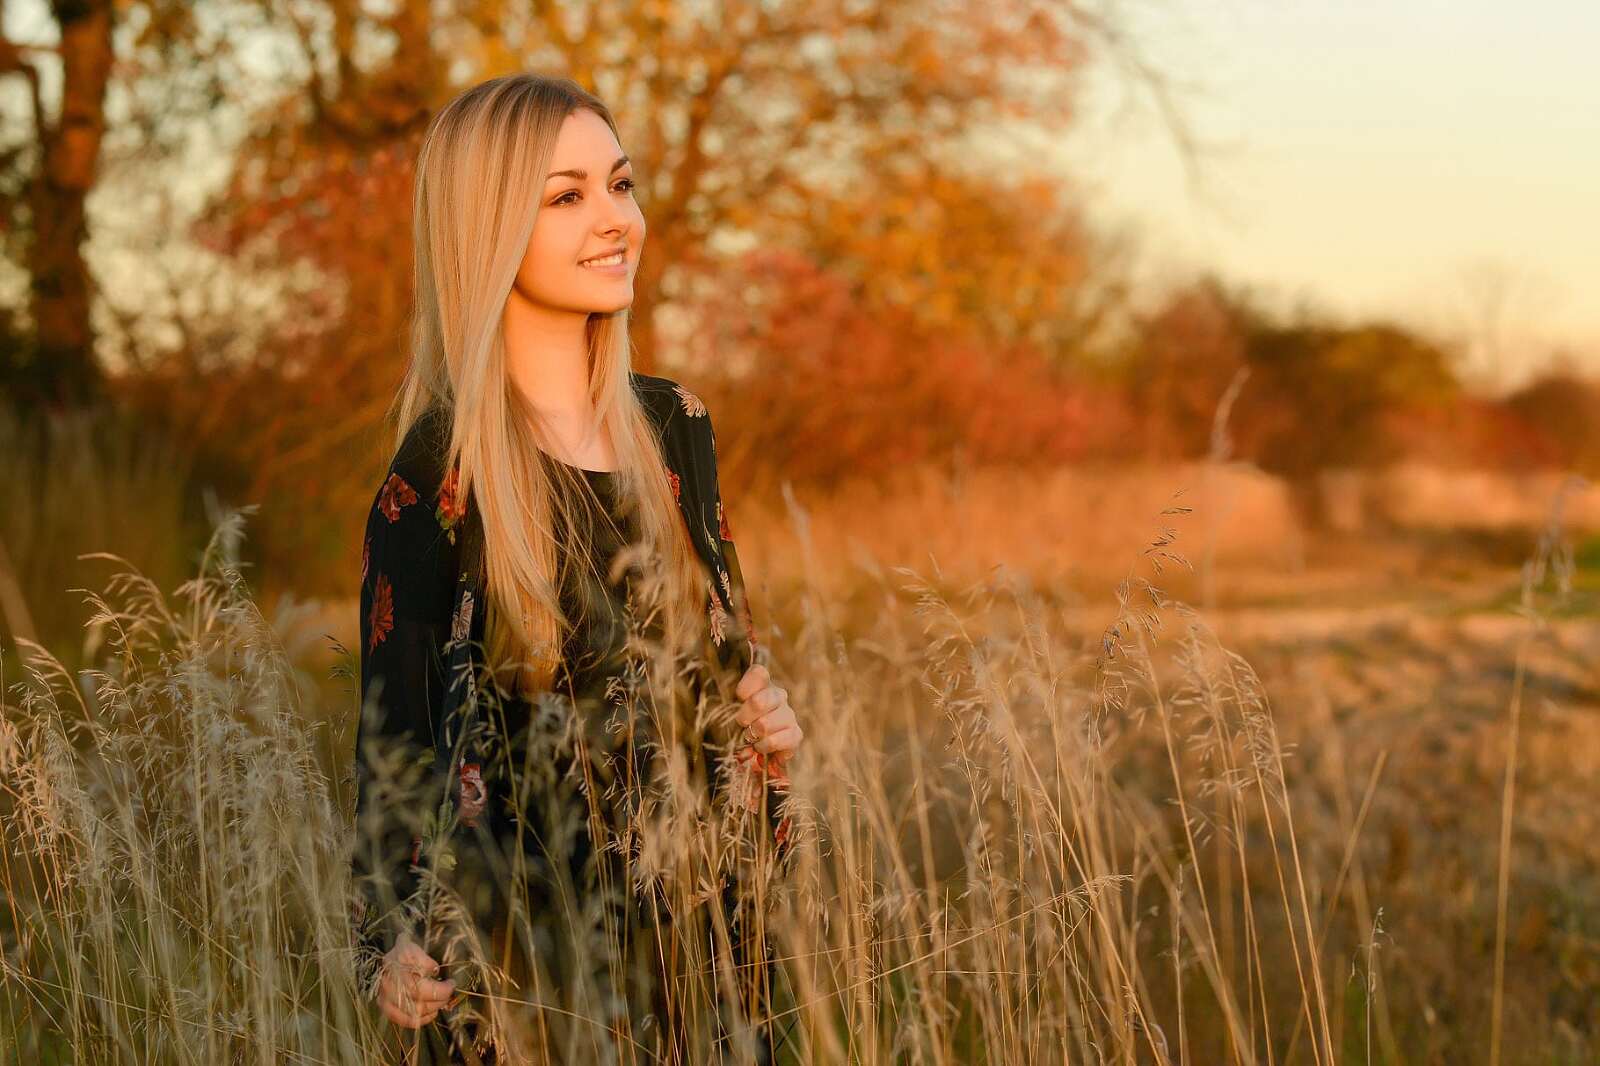 A high school senior poses in a field with golden light surrounding her